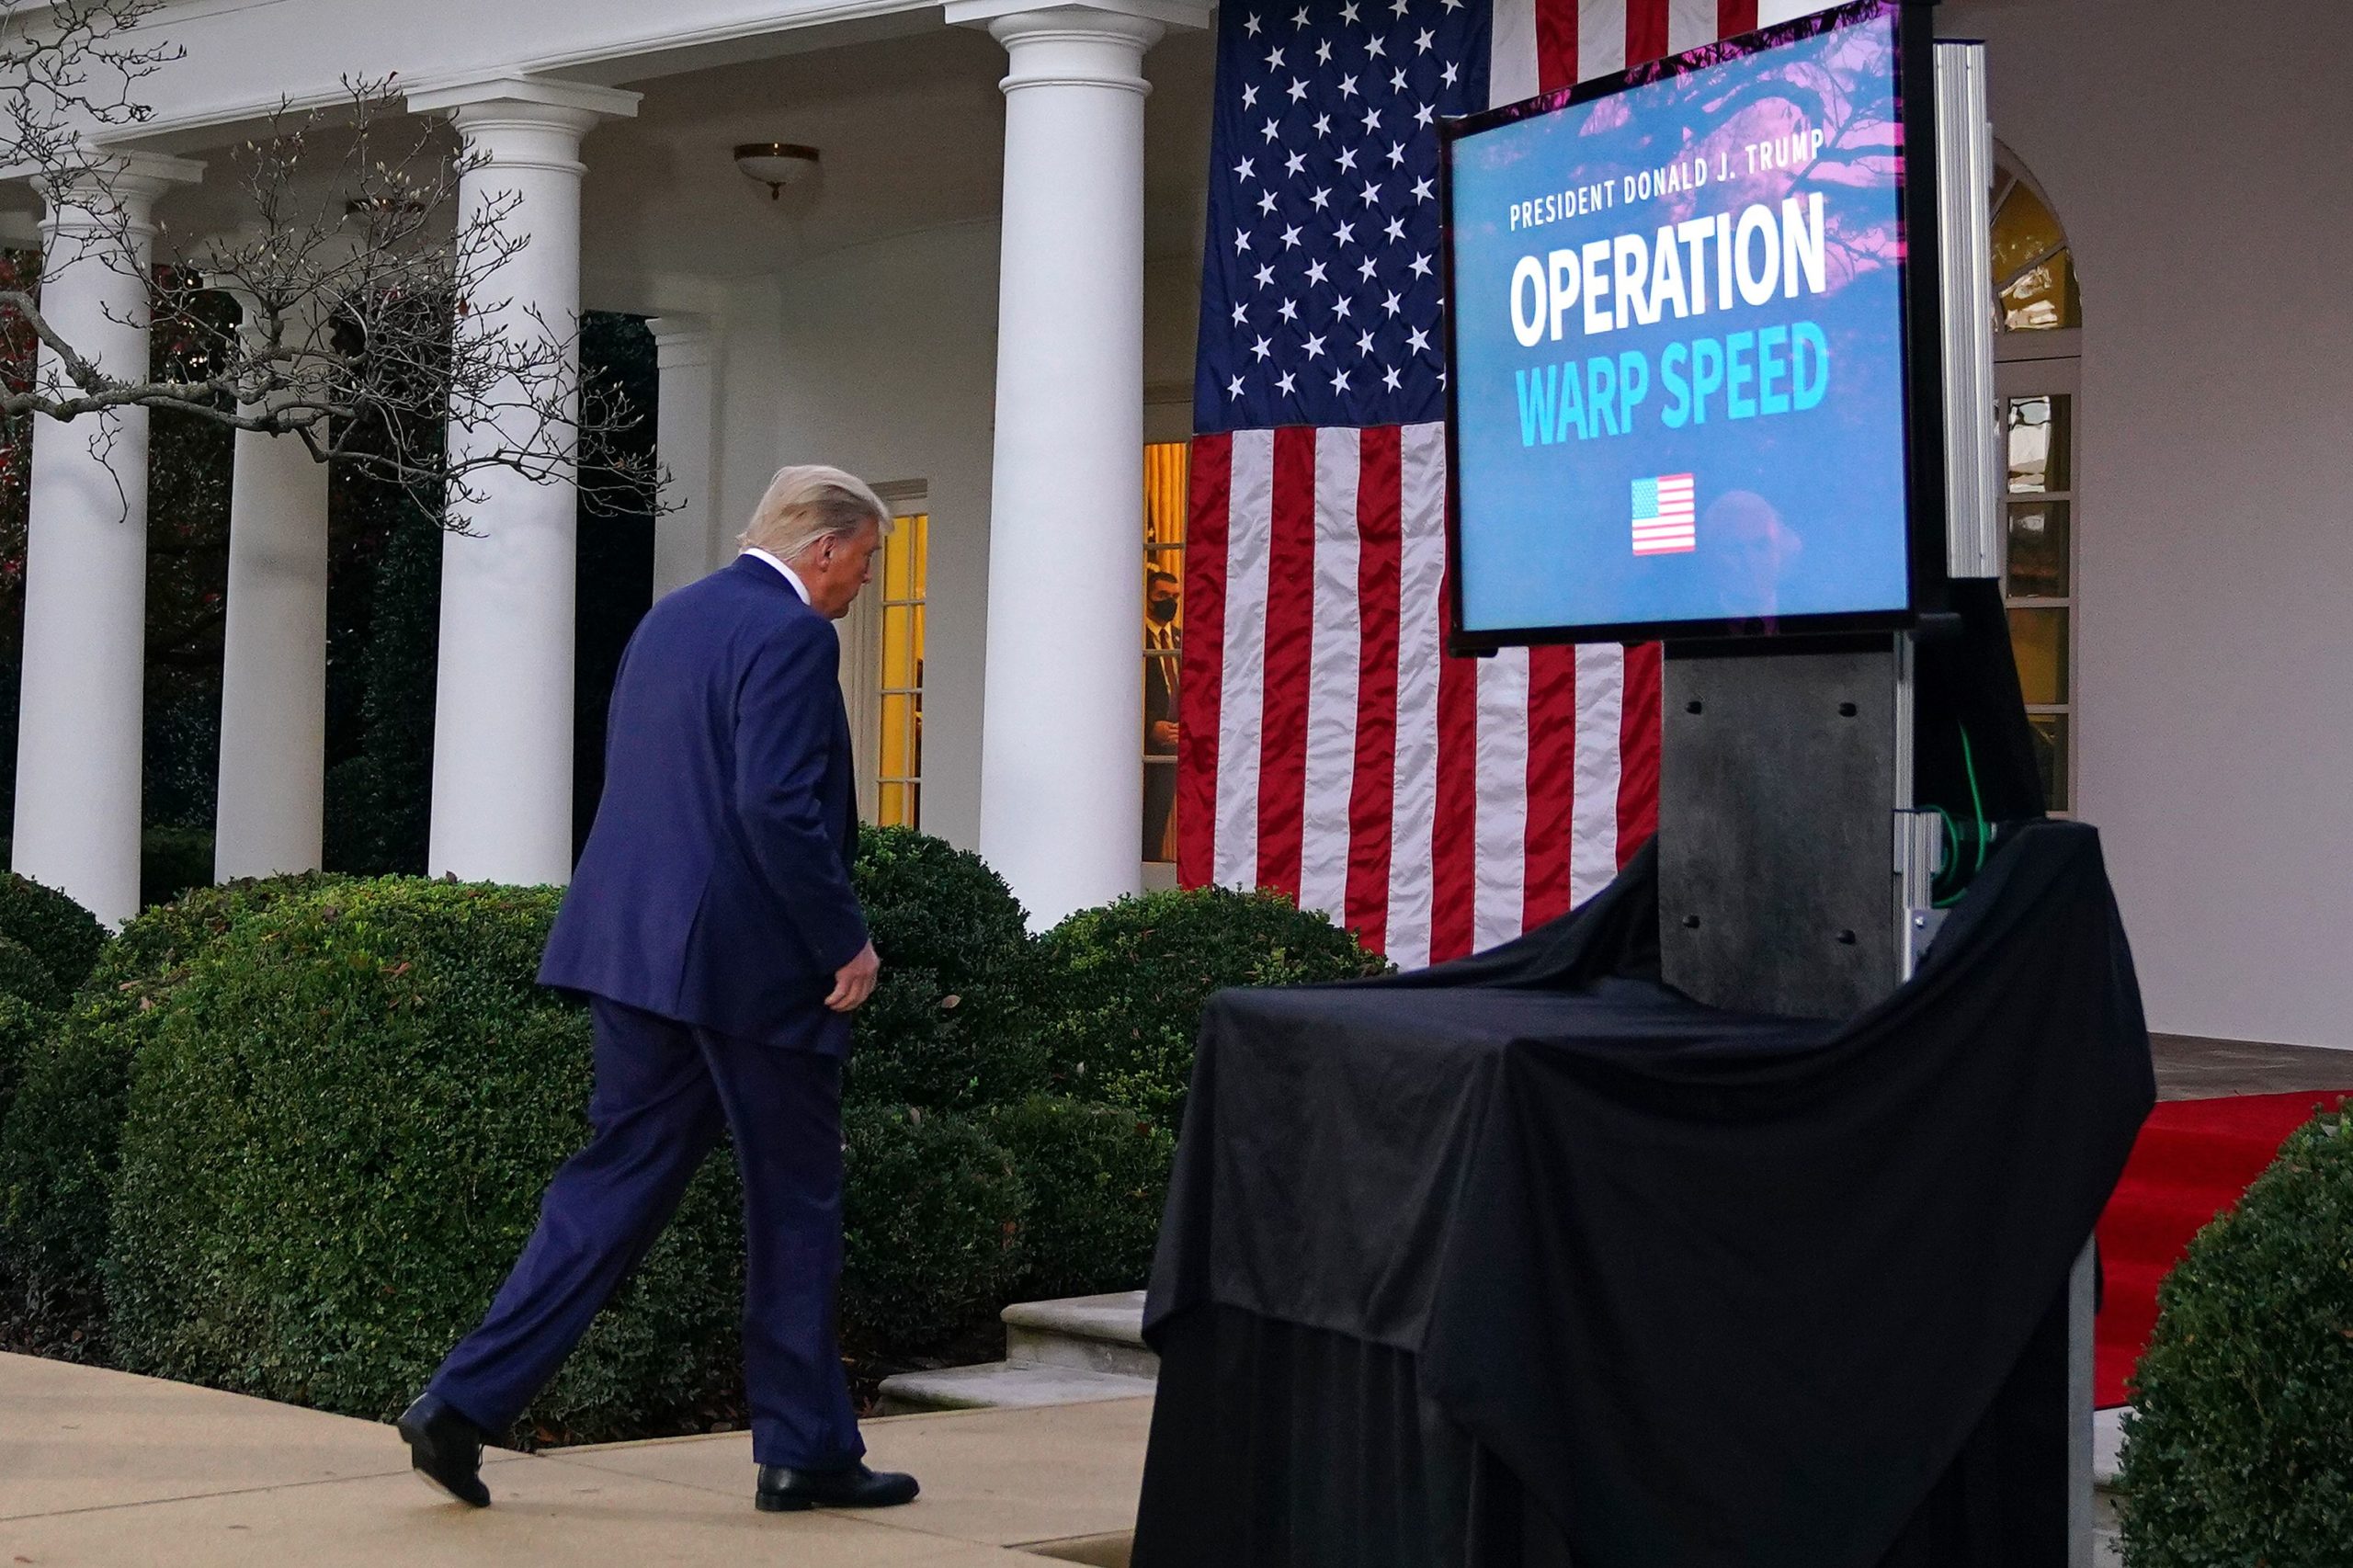 President Donald Trump departs after delivering an update on Operation Warp Speed in the Rose Garden of the White House on Friday. (Mandel Ngan/AFP via Getty Images)